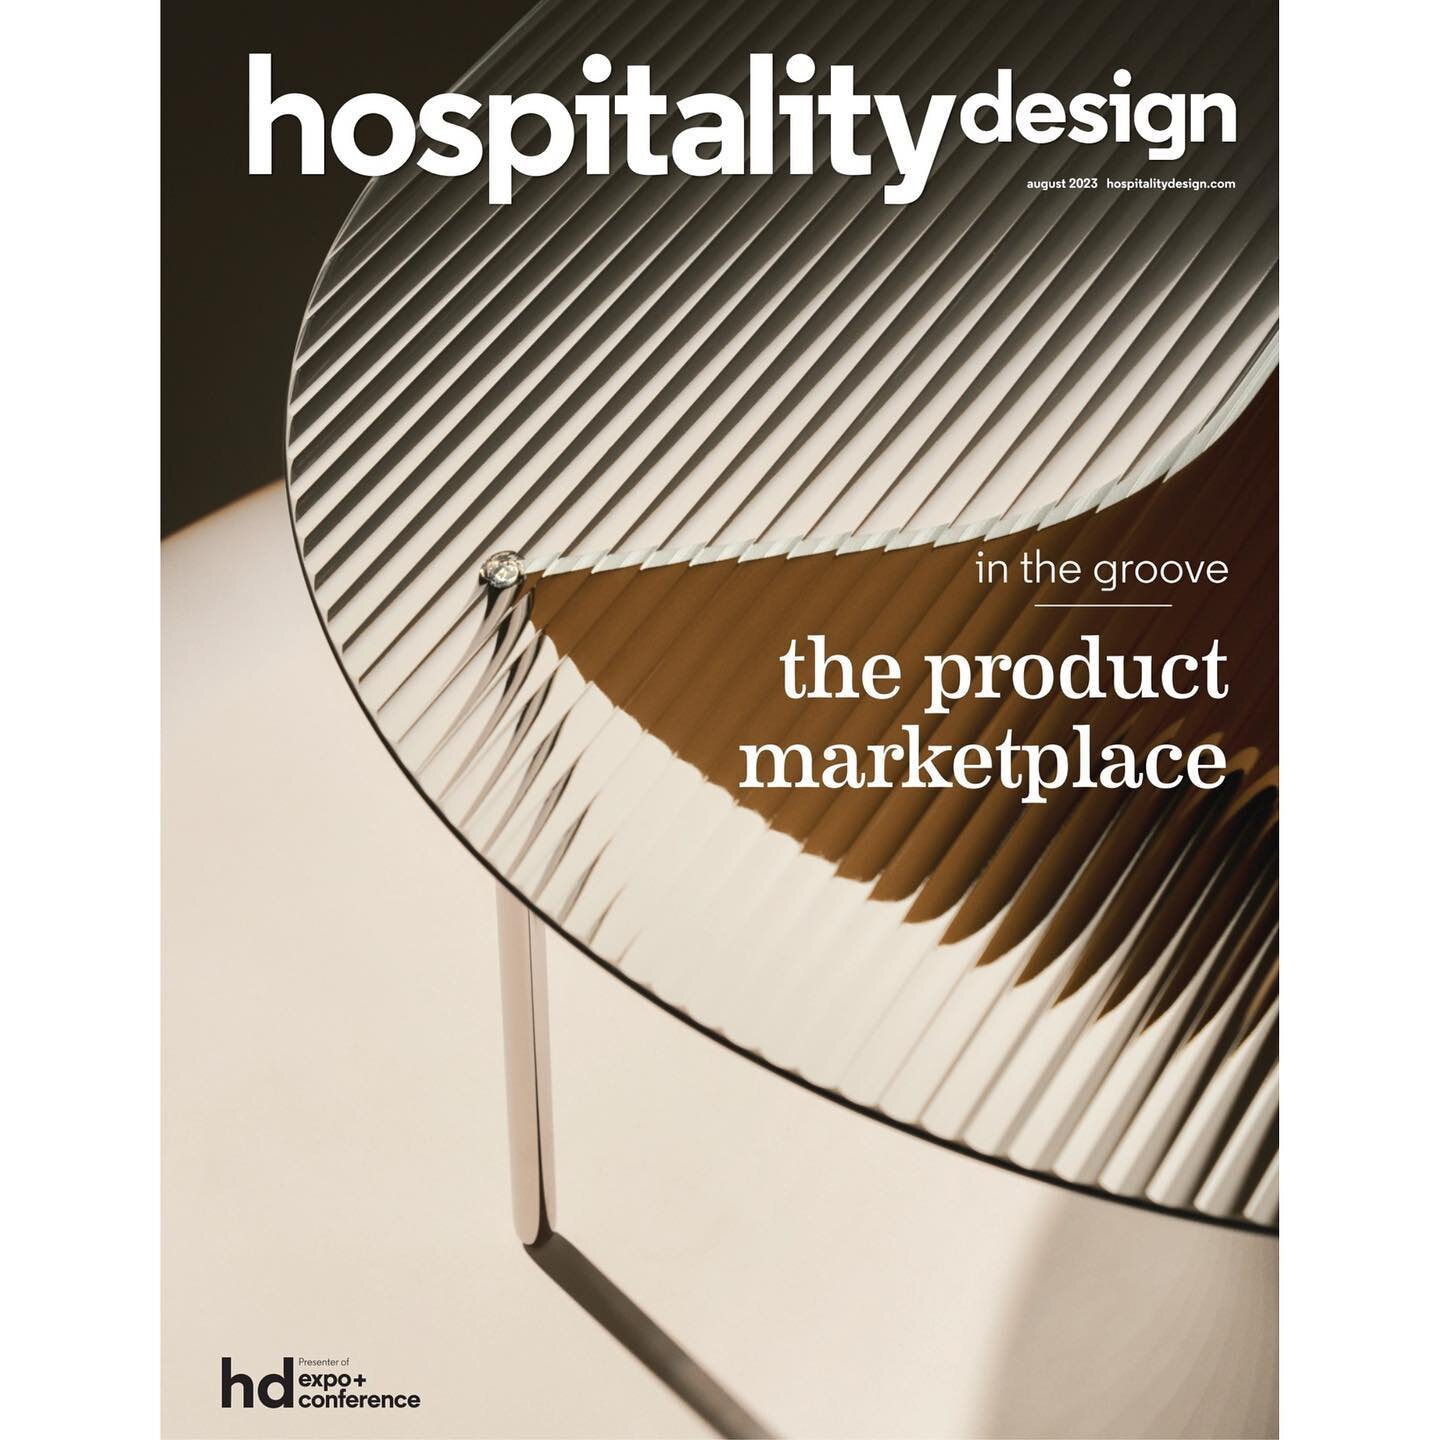 Cover of @hospitalitydesign !!

I was recently interviewed by Hospitality Design Magazine for the latest issue. Seeing my design on the cover of a magazine is one of the coolest moments in my career as a designer and I am incredibly grateful for this